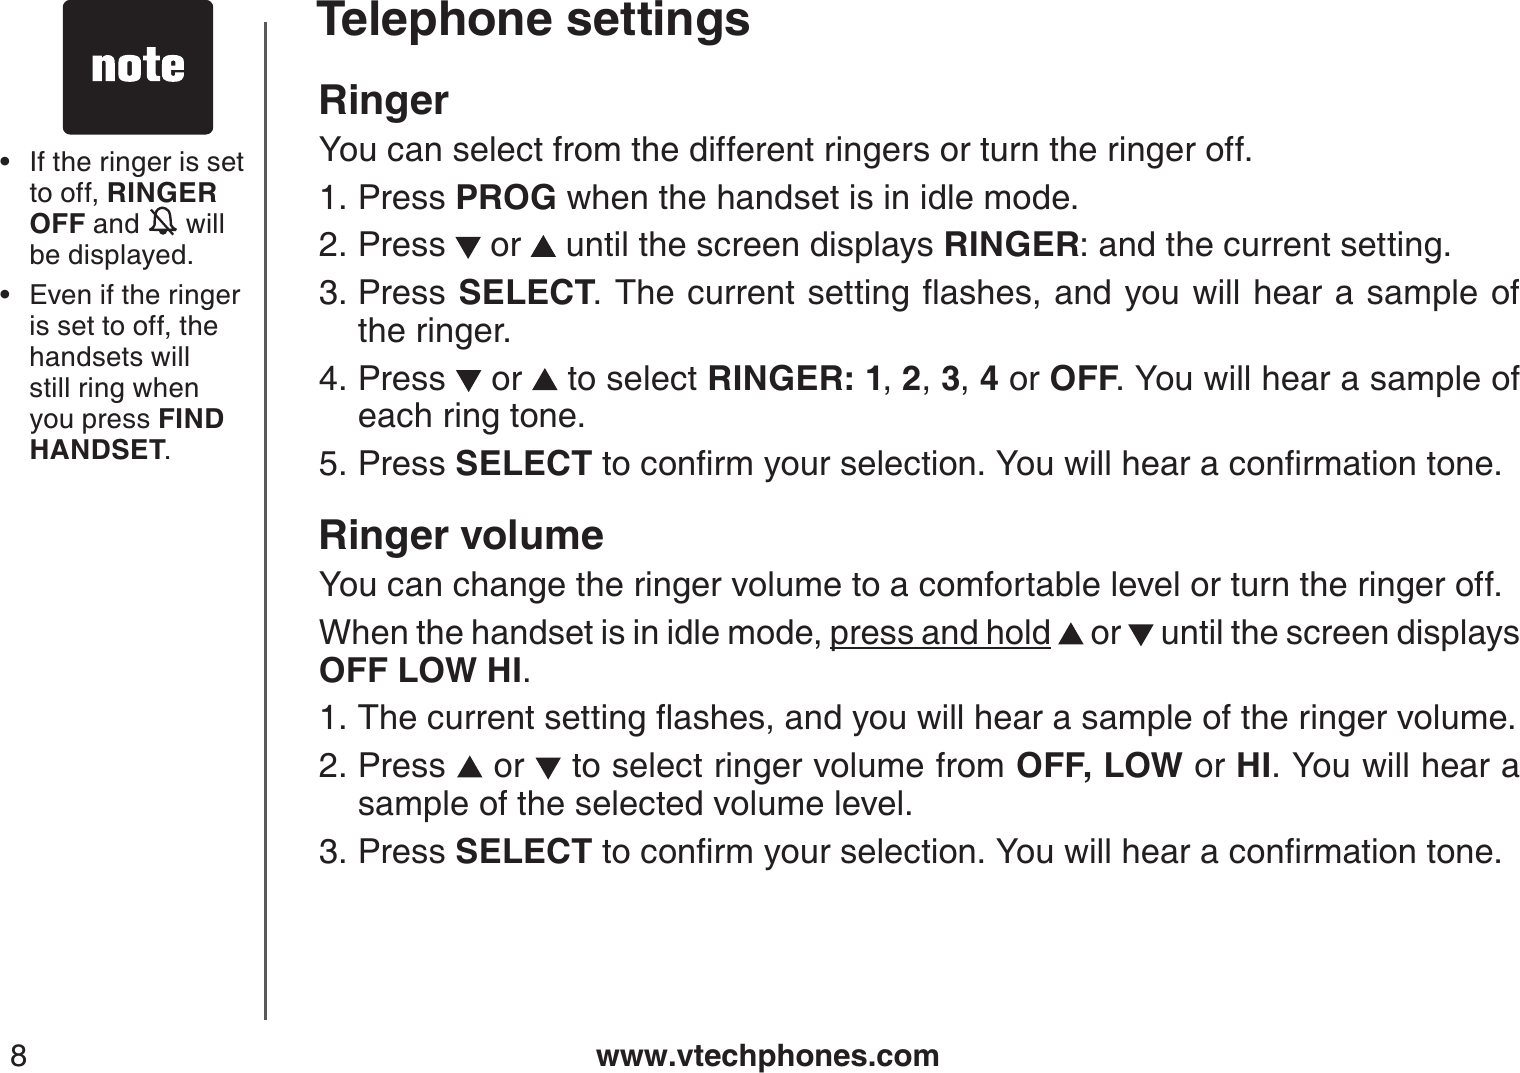 www.vtechphones.com8Telephone settingsRingerYou can select from the different ringers or turn the ringer off.Press PROG when the handset is in idle mode.Press   or   until the screen displays RINGER: and the current setting.Press  SELECT6JGEWTTGPVUGVVKPIƀCUJGUCPF[QWYKNNJGCTCUCORNGQHthe ringer.Press   or   to select RINGER: 1,2,3,4 or OFF. You will hear a sample of each ring tone.Press SELECT VQEQPſTO[QWTUGNGEVKQP;QWYKNNJGCTCEQPſTOCVKQPVQPGRinger volumeYou can change the ringer volume to a comfortable level or turn the ringer off.When the handset is in idle mode, press and hold  or   until the screen displays OFF LOW HI.6JGEWTTGPVUGVVKPIƀCUJGUCPF[QWYKNNJGCTCUCORNGQHVJGTKPIGTXQNWOGPress   or  to select ringer volume from OFF, LOW or HI. You will hear a sample of the selected volume level.Press SELECT VQEQPſTO[QWTUGNGEVKQP;QWYKNNJGCTCEQPſTOCVKQPVQPG1.2.3.4.5.1.2.3.If the ringer is set to off, RINGER OFF and   will be displayed.Even if the ringer is set to off, the handsets will still ring when you press FIND HANDSET.••